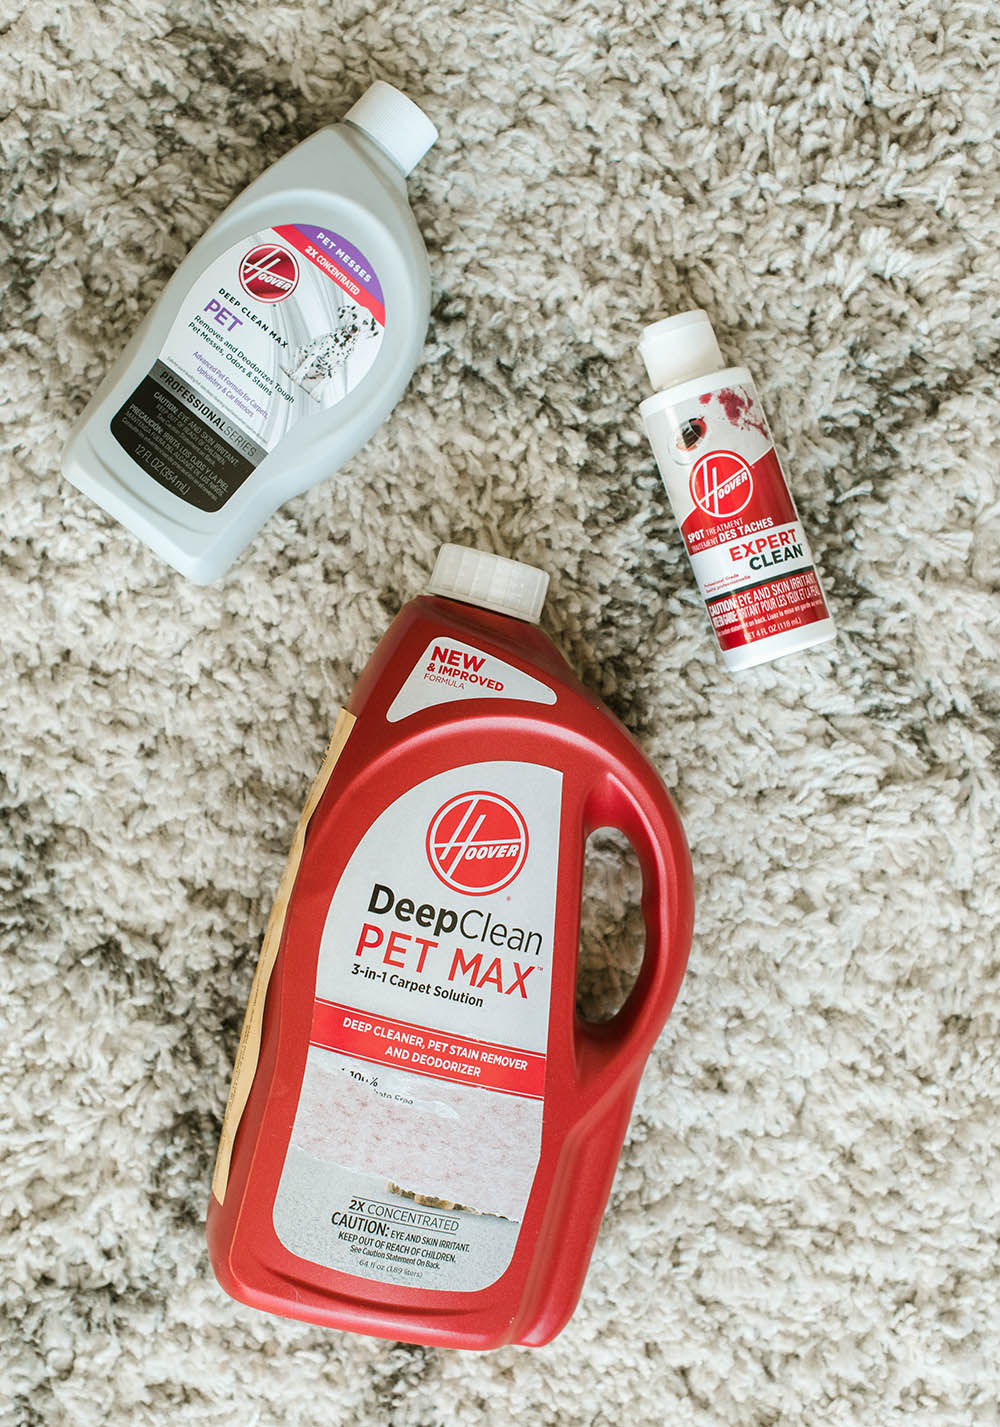 Various Hoover cleaning products that can be used with the Hoover SmartWash advanced pet carpet cleaner.